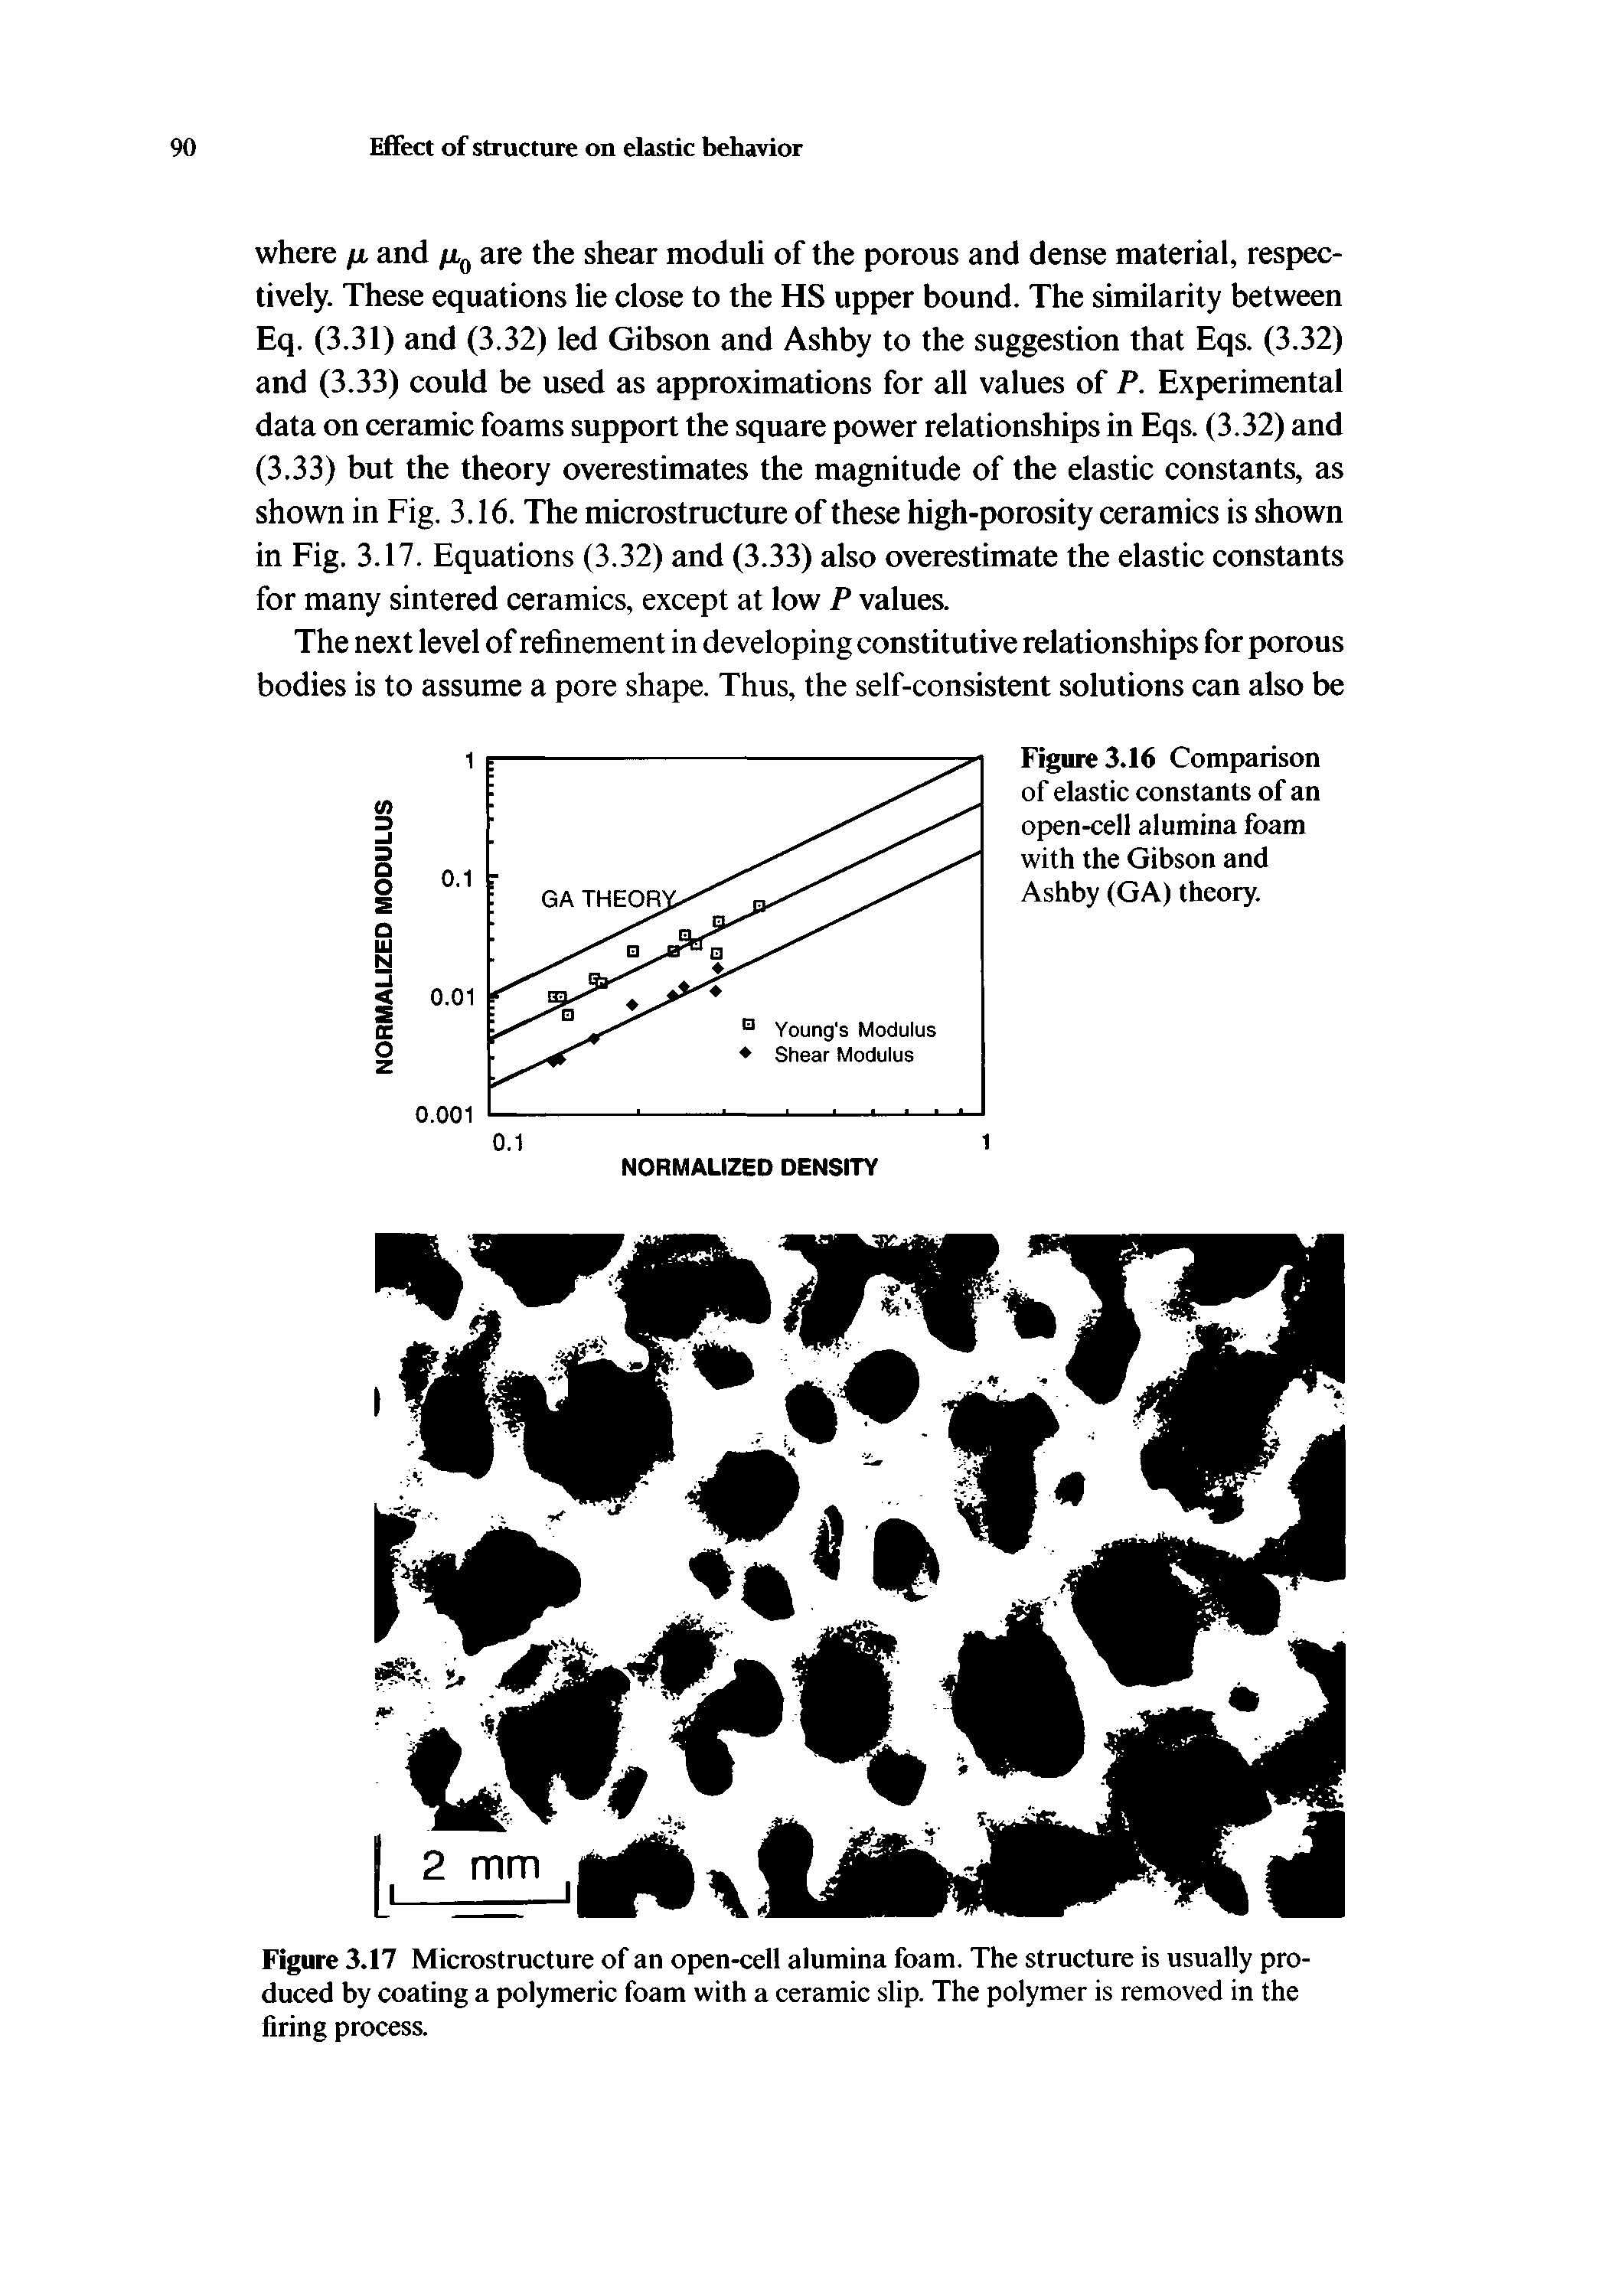 Figure 3.16 Comparison of elastic constants of an open-cell alumina foam with the Gibson and Ashby (GA) theory.